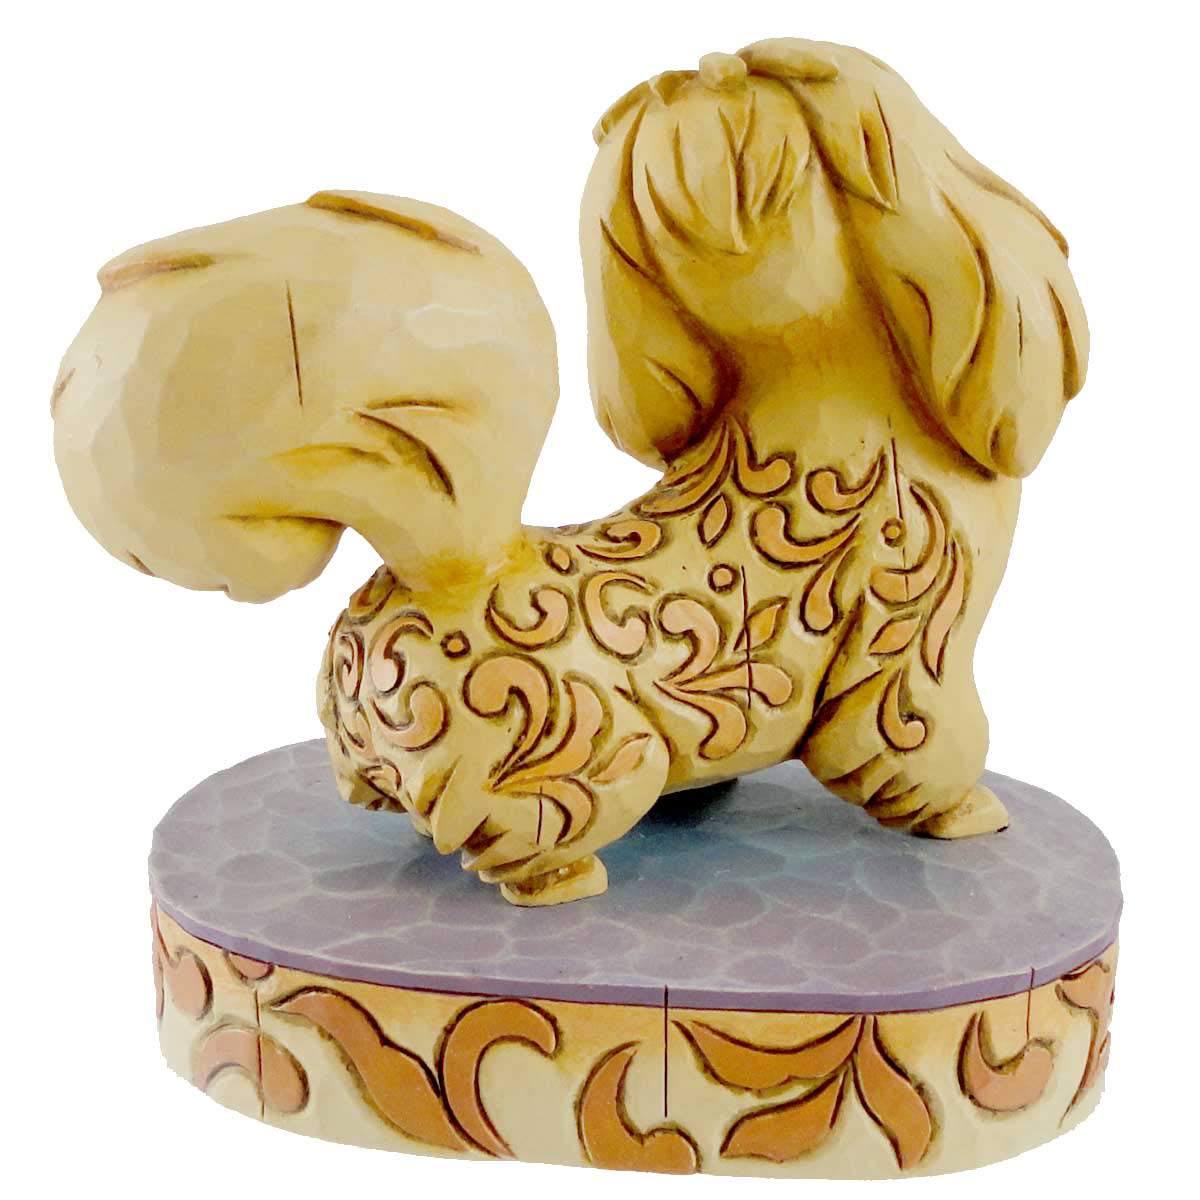 Disney Traditions Canine Collection: Lady and the Tramp 'Flirtatious Peg' Figurine